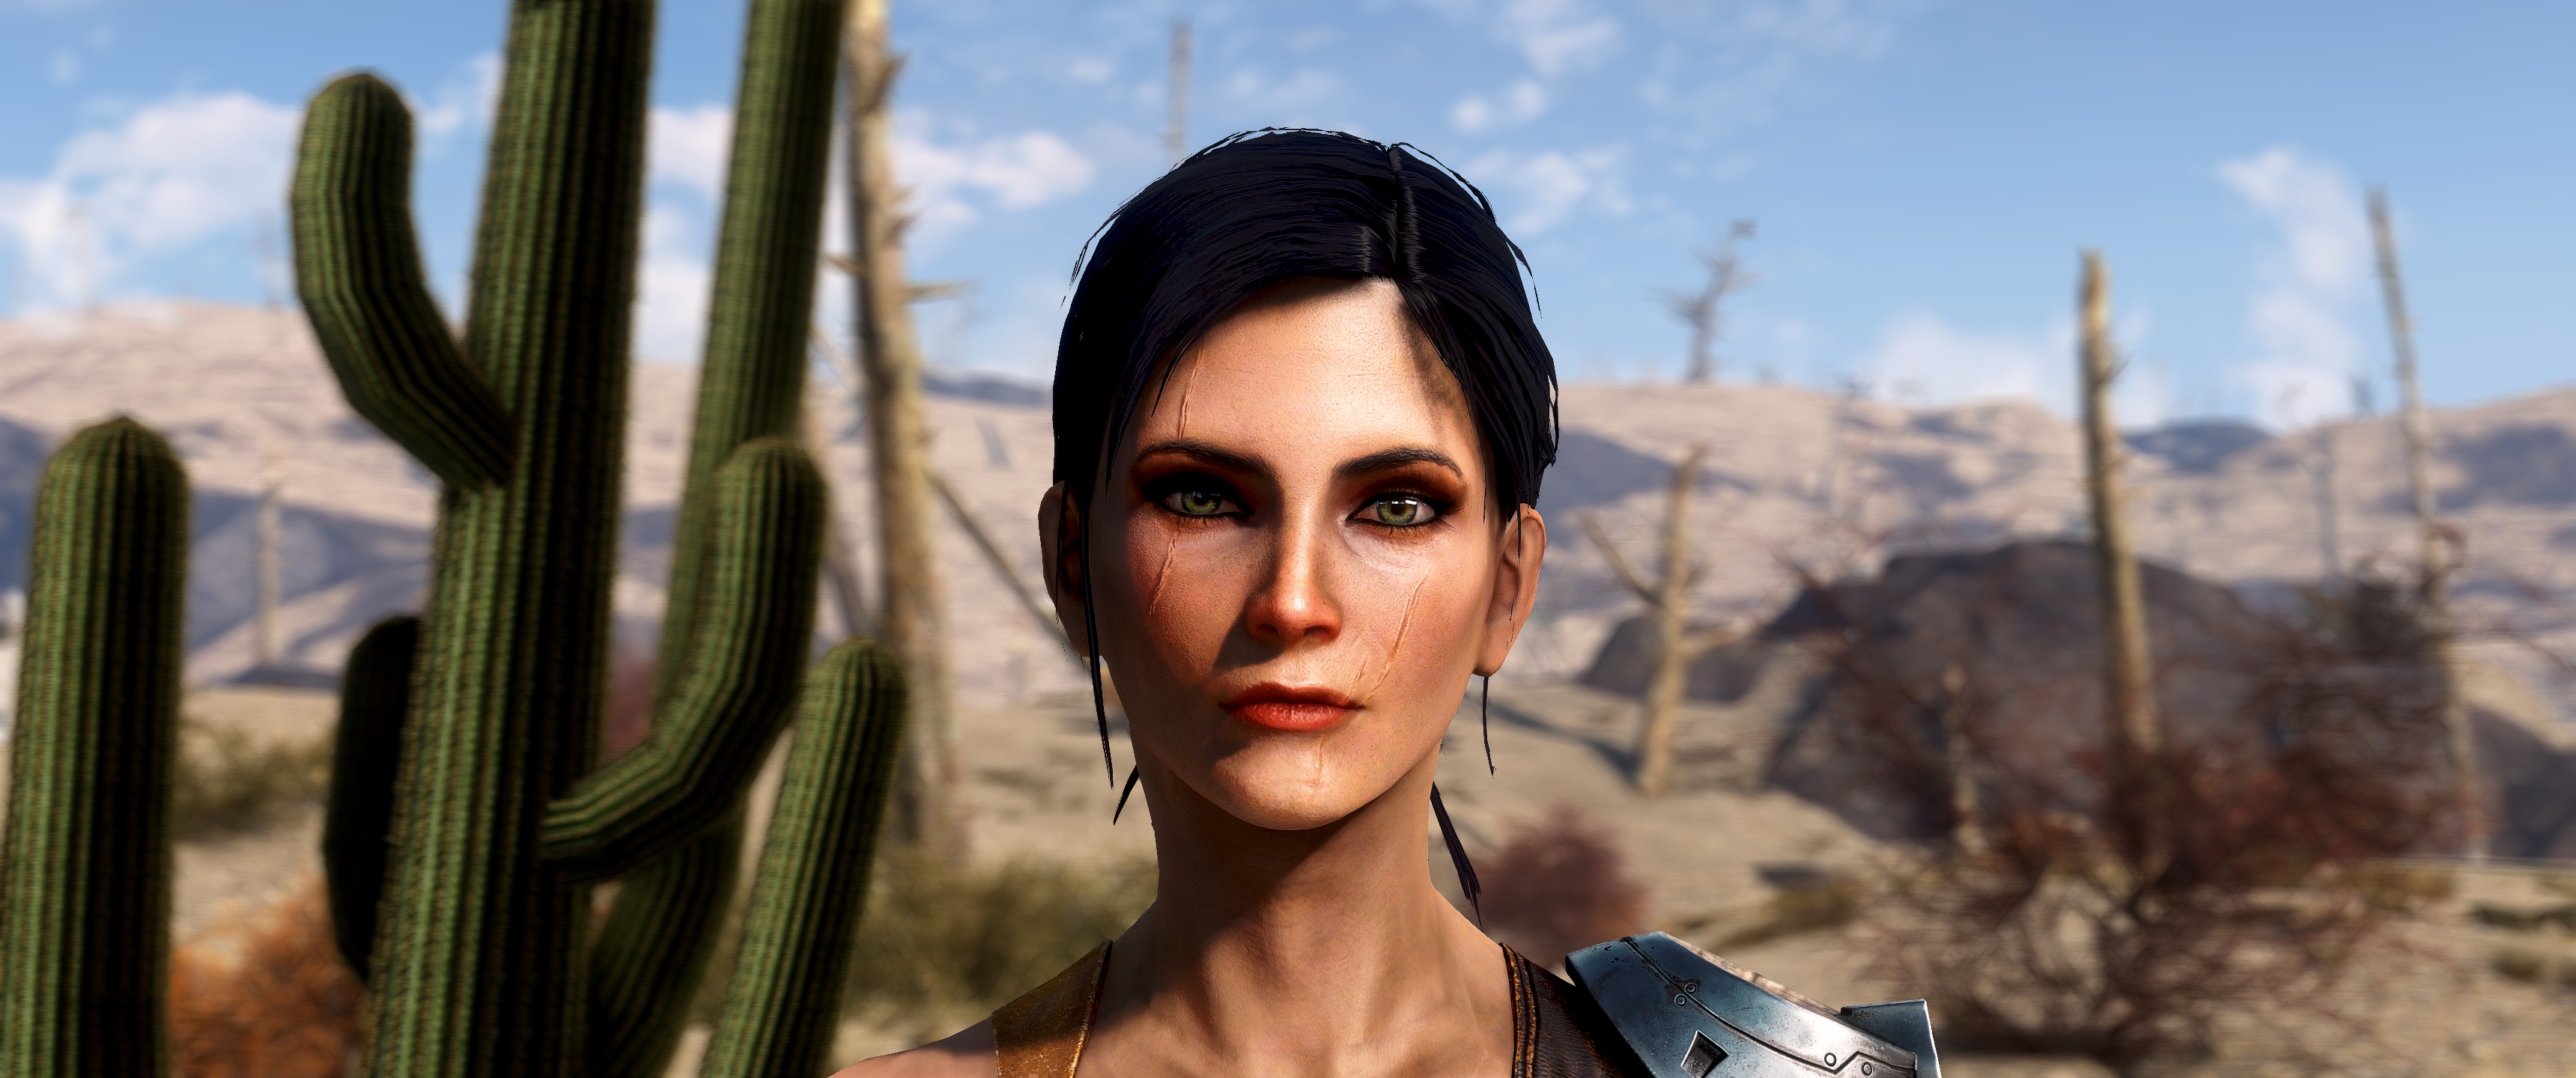 The eyes of beauty для fallout 4 фото 4